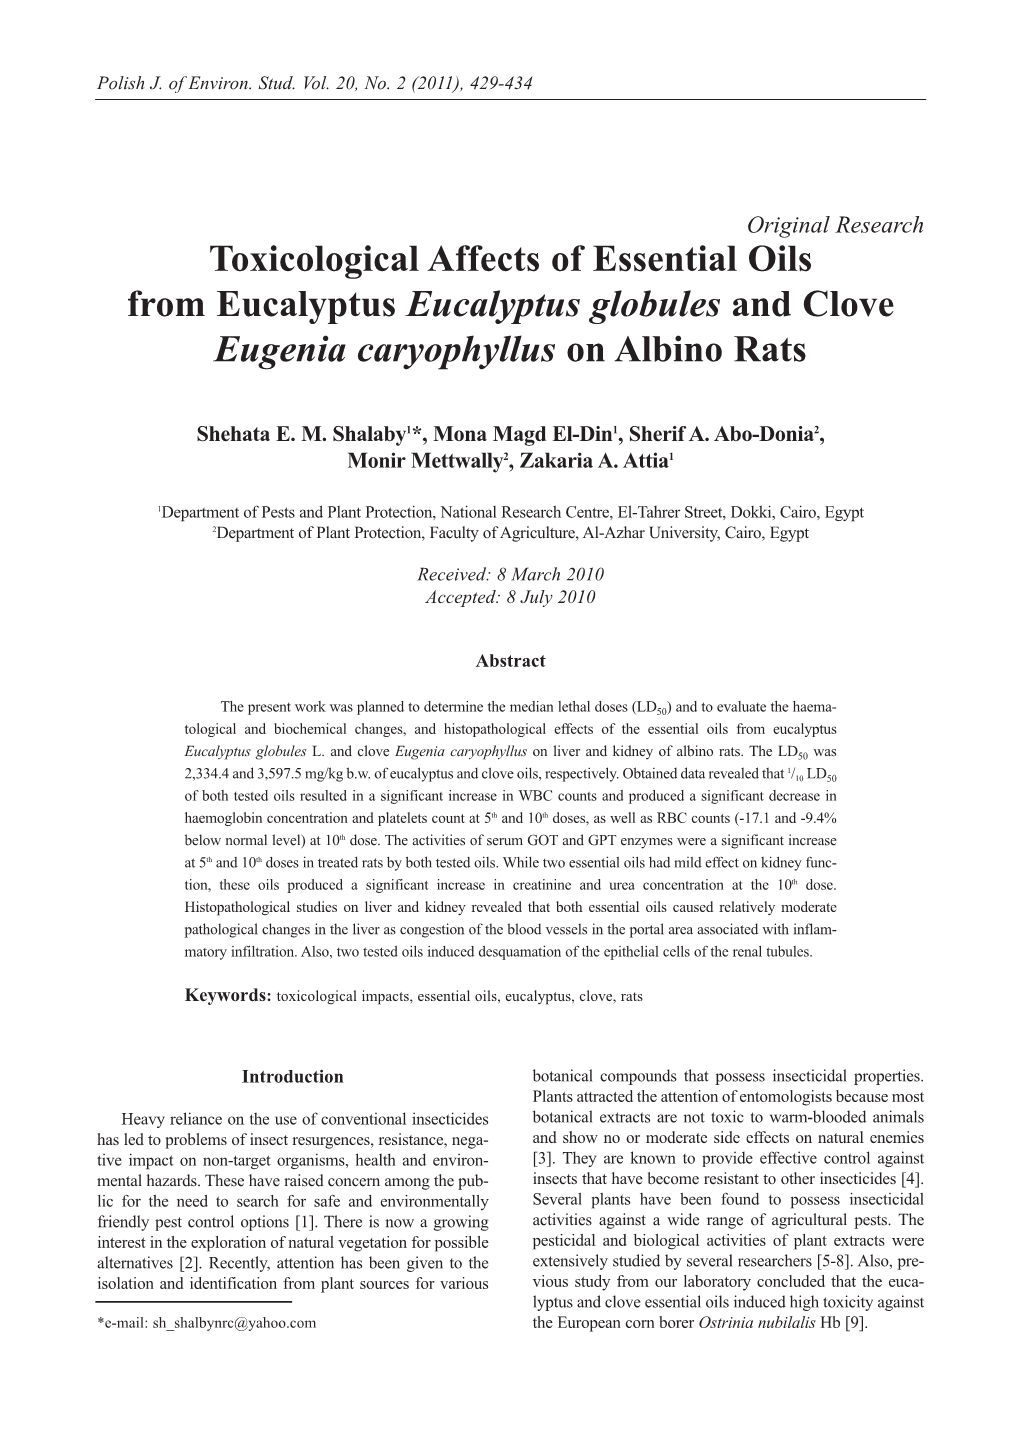 Toxicological Affects of Essential Oils from Eucalyptus Eucalyptus Globules and Clove Eugenia Caryophyllus on Albino Rats